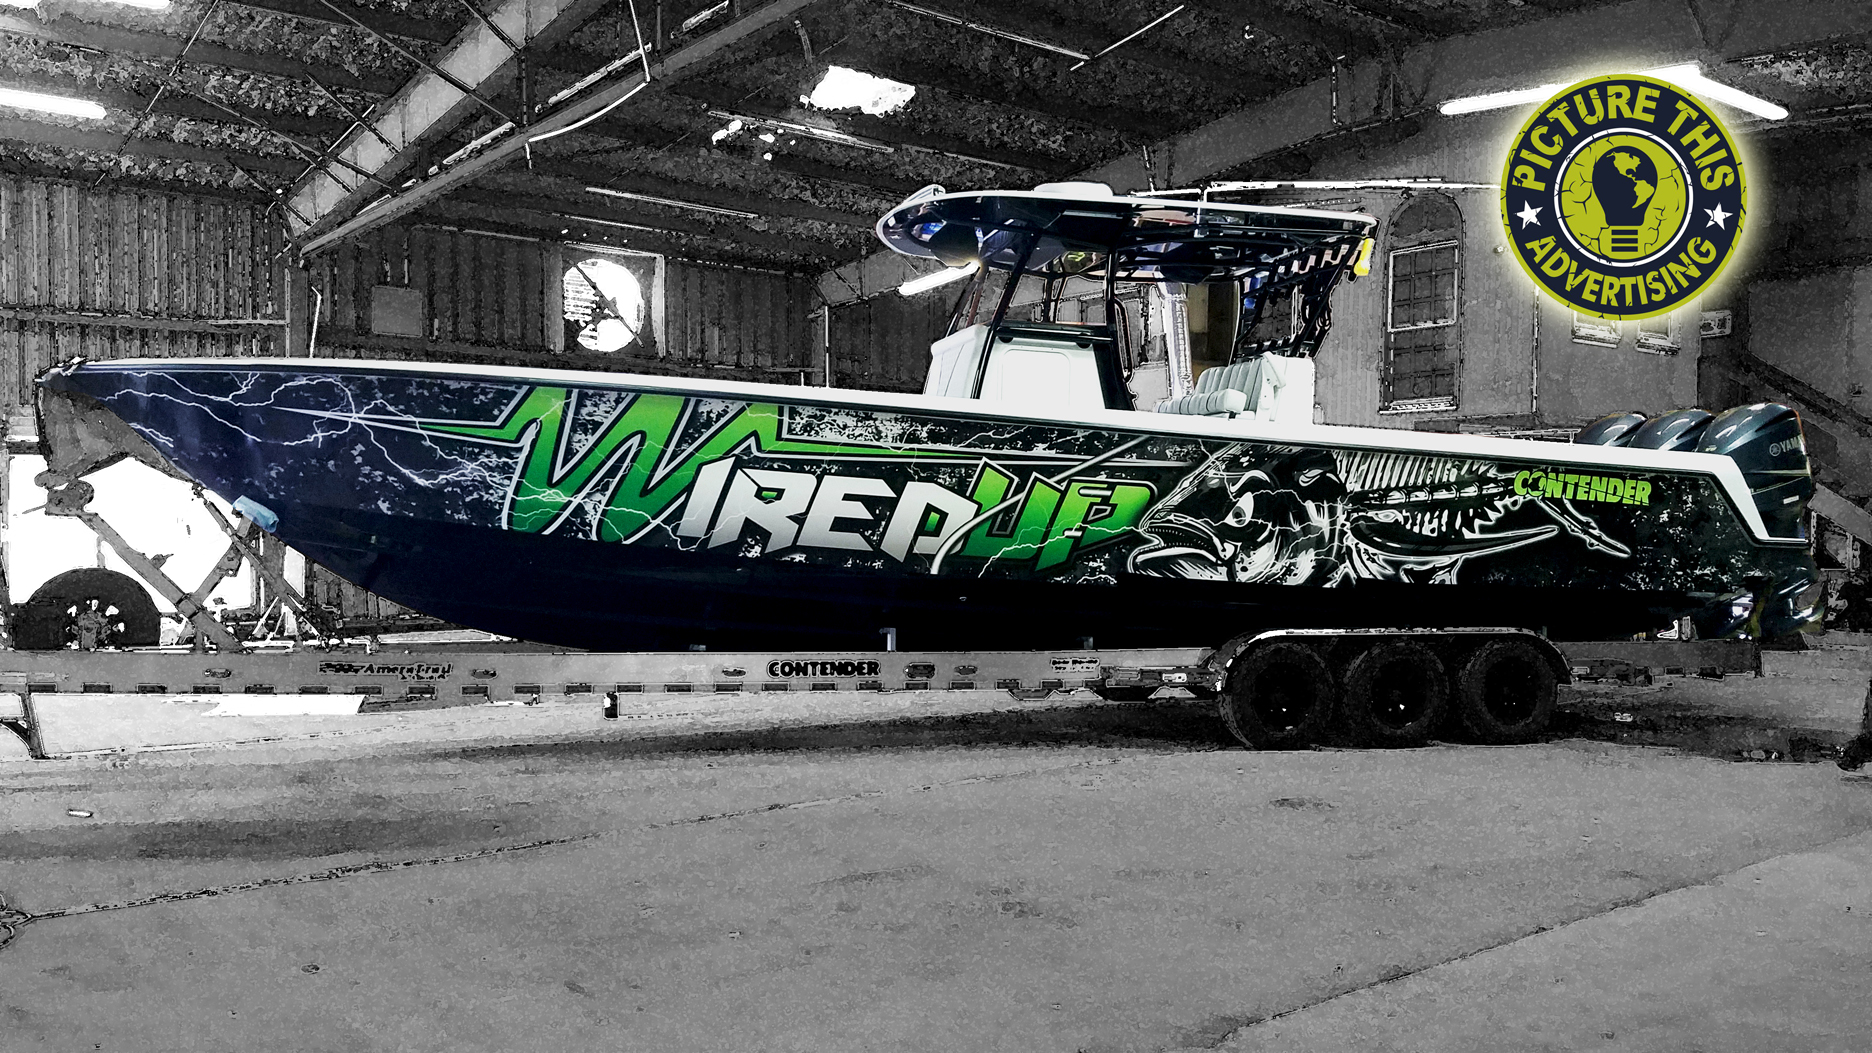 39ft Contender Boat Wrap - Wired Up Boat Graphics